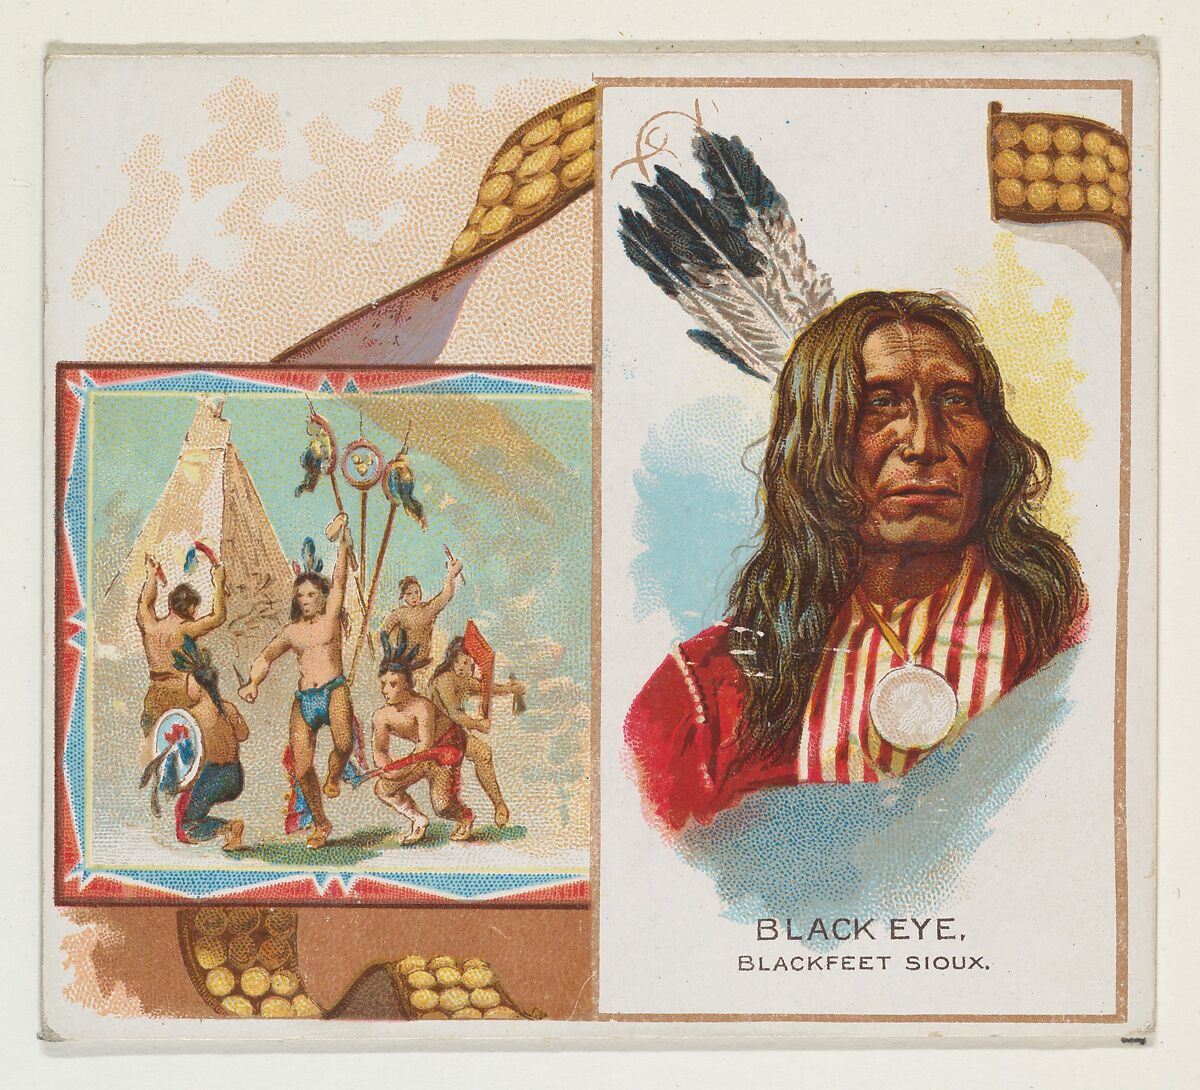 Black Eye, Blackfeet Sioux, from the American Indian Chiefs series (N36) for Allen & Ginter Cigarettes, Issued by Allen &amp; Ginter (American, Richmond, Virginia), Commercial color lithograph 